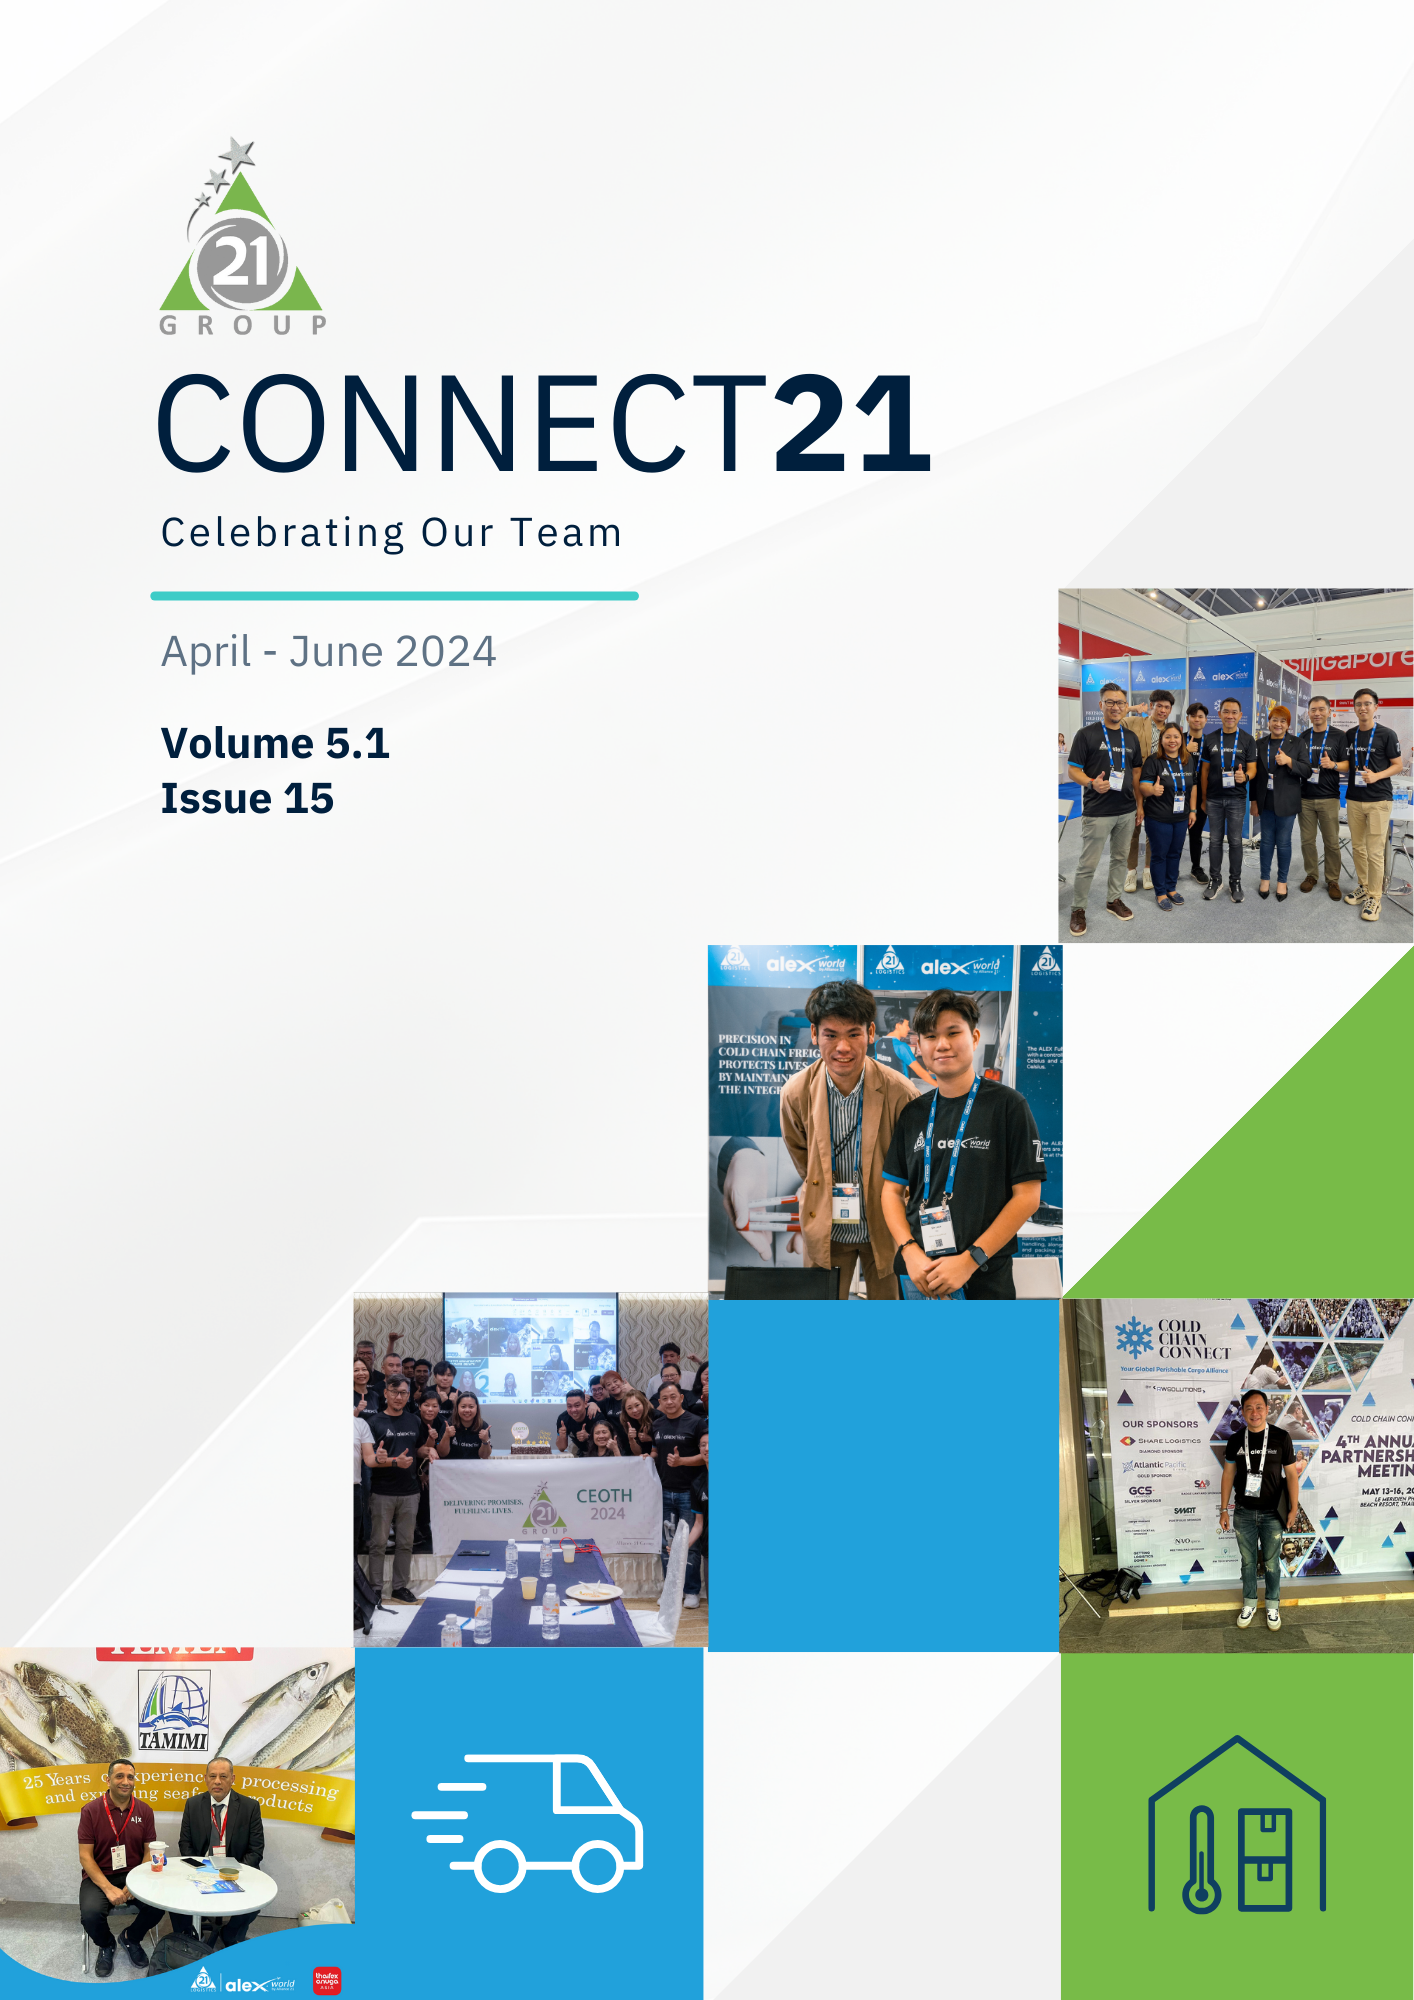 Connect21 | Volume 5.1 Issue 15 | April - June 2024